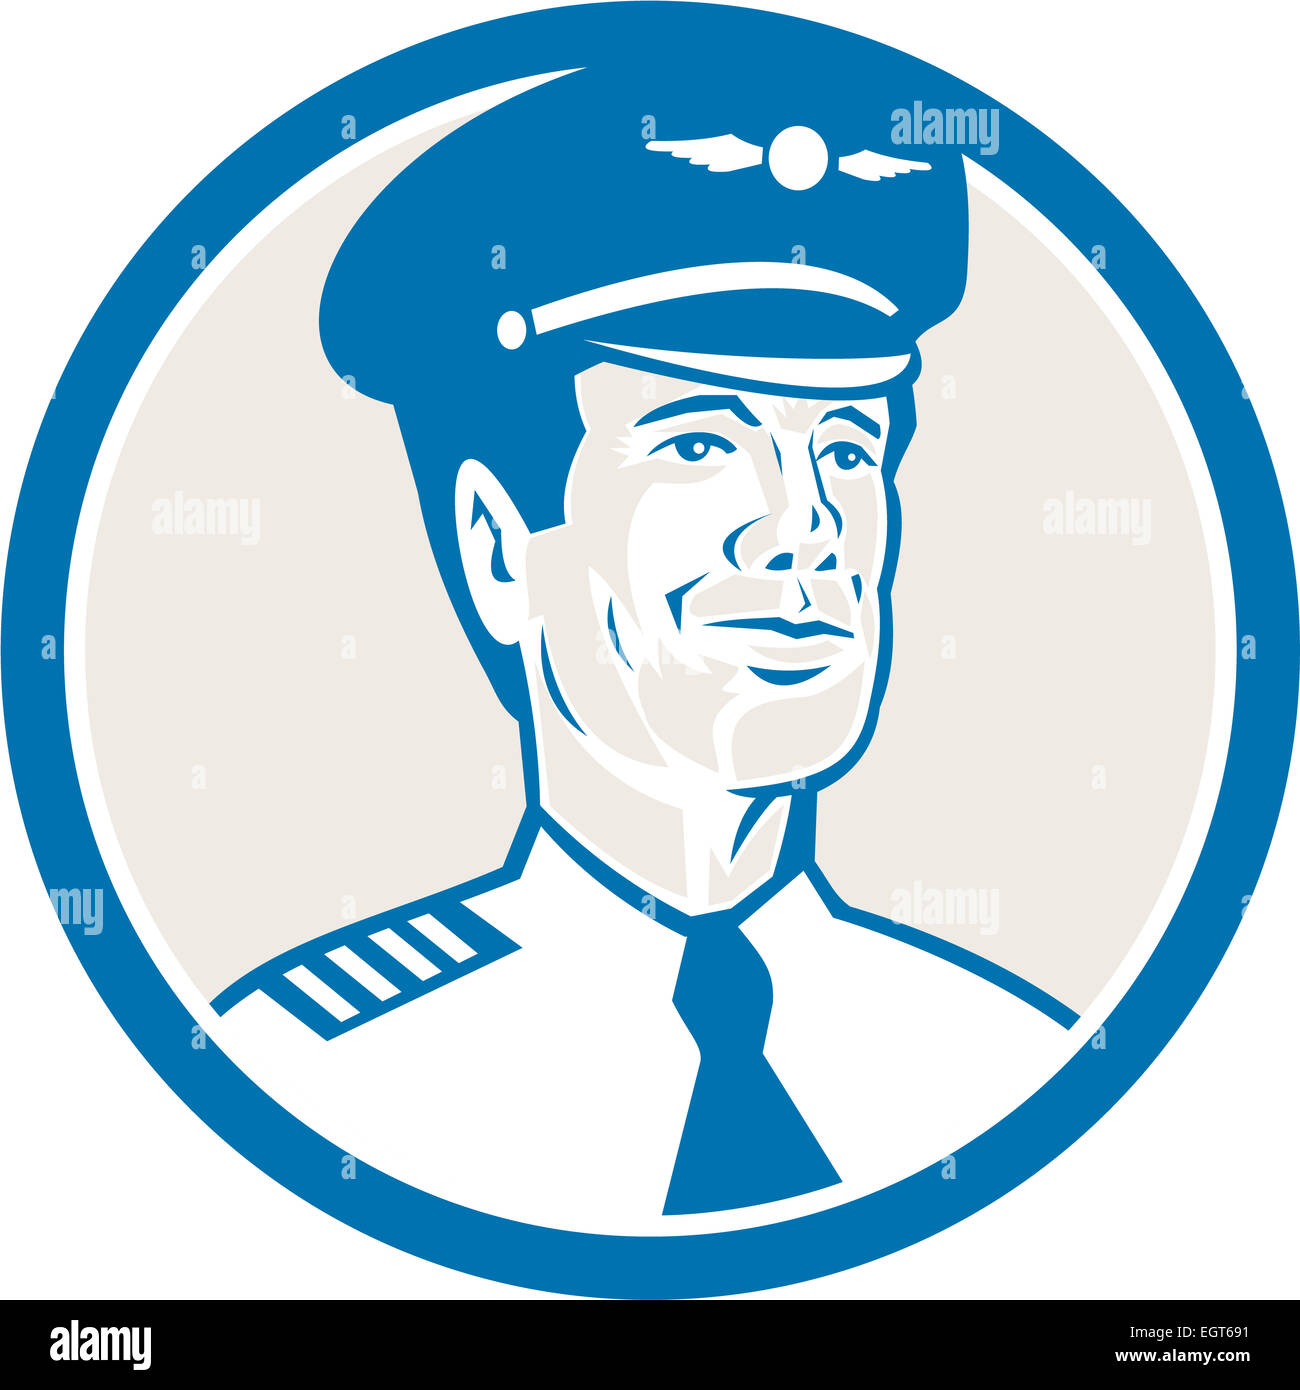 Illustration of an flight engineer, navigator , airline aircraft pilot or aeronautical aviator looking to front set inside circle on isolated background with done in retro style. Stock Photo